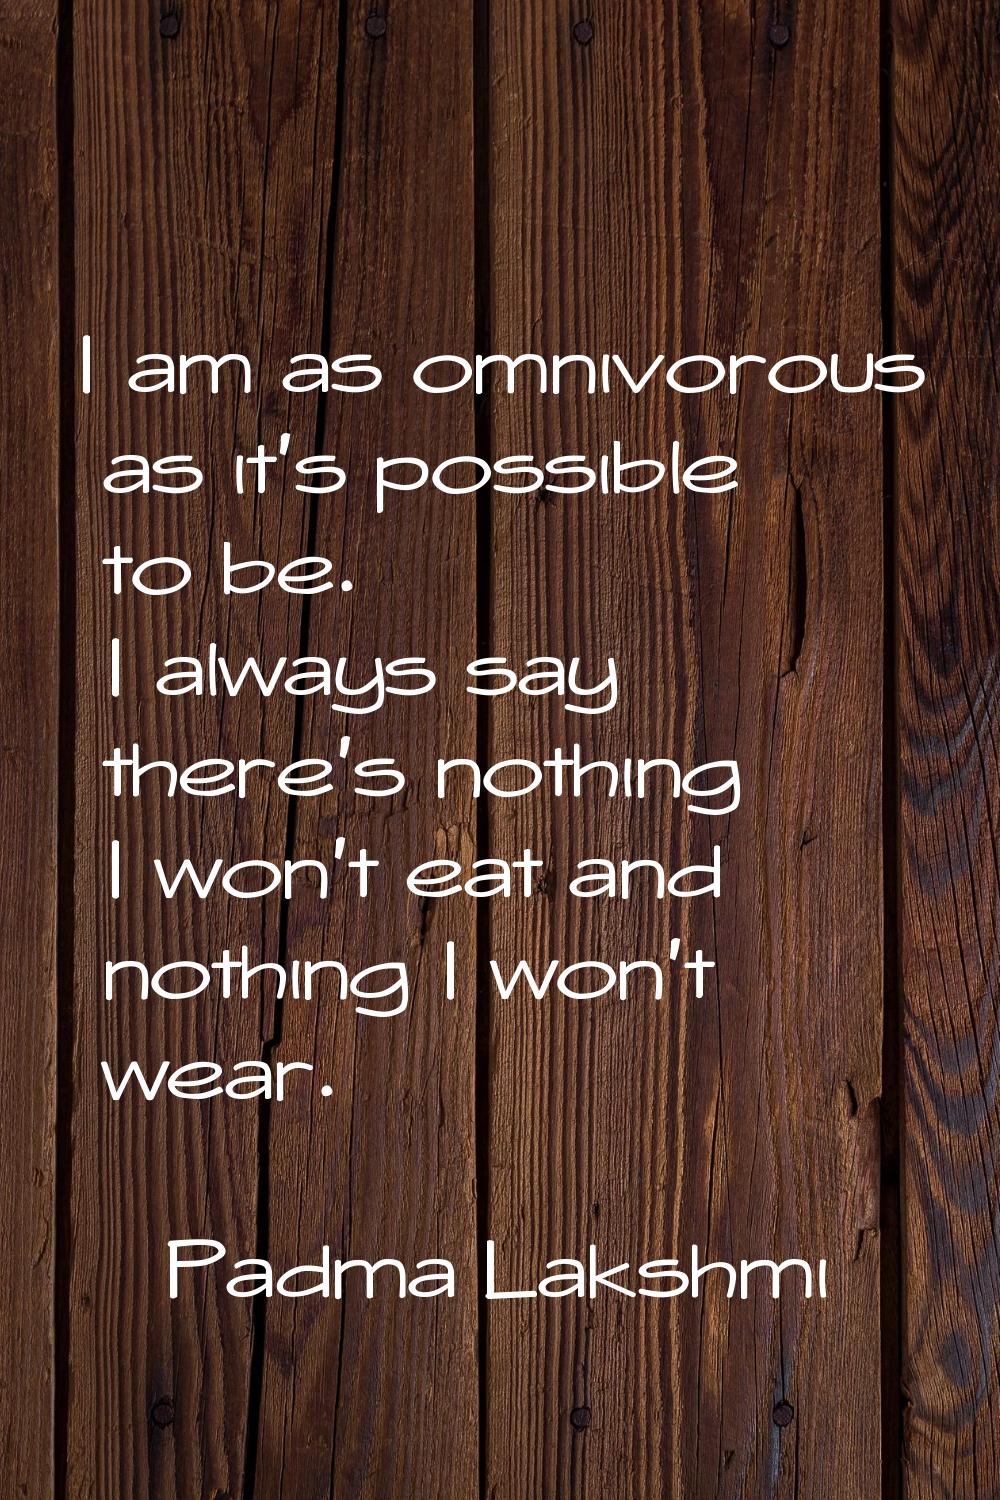 I am as omnivorous as it's possible to be. I always say there's nothing I won't eat and nothing I w